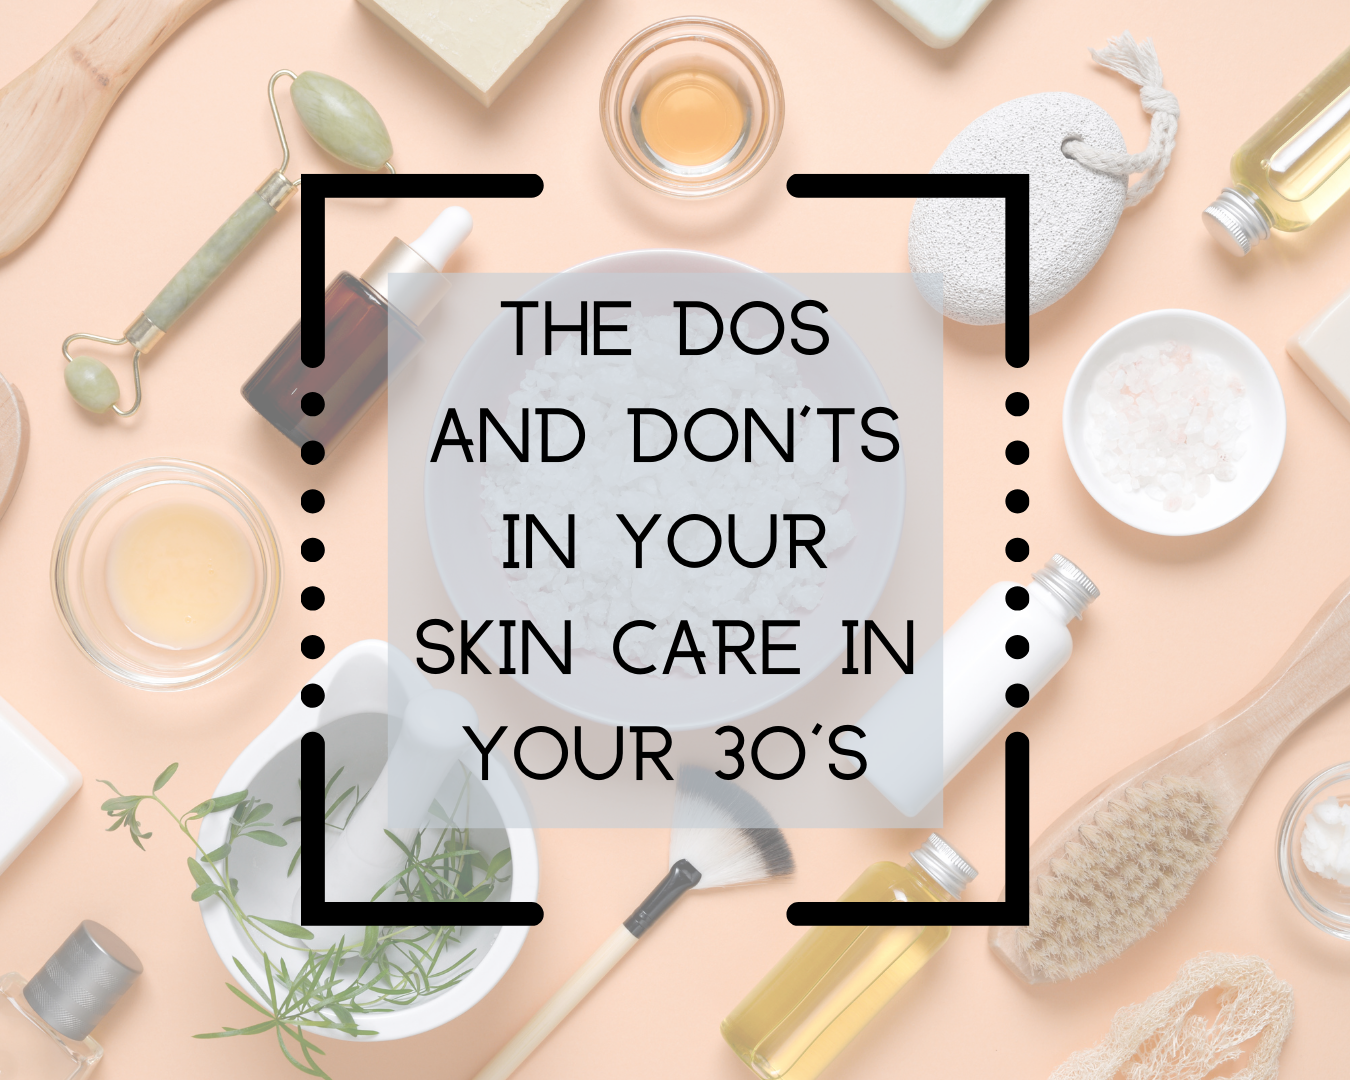 Skin care in your 30s